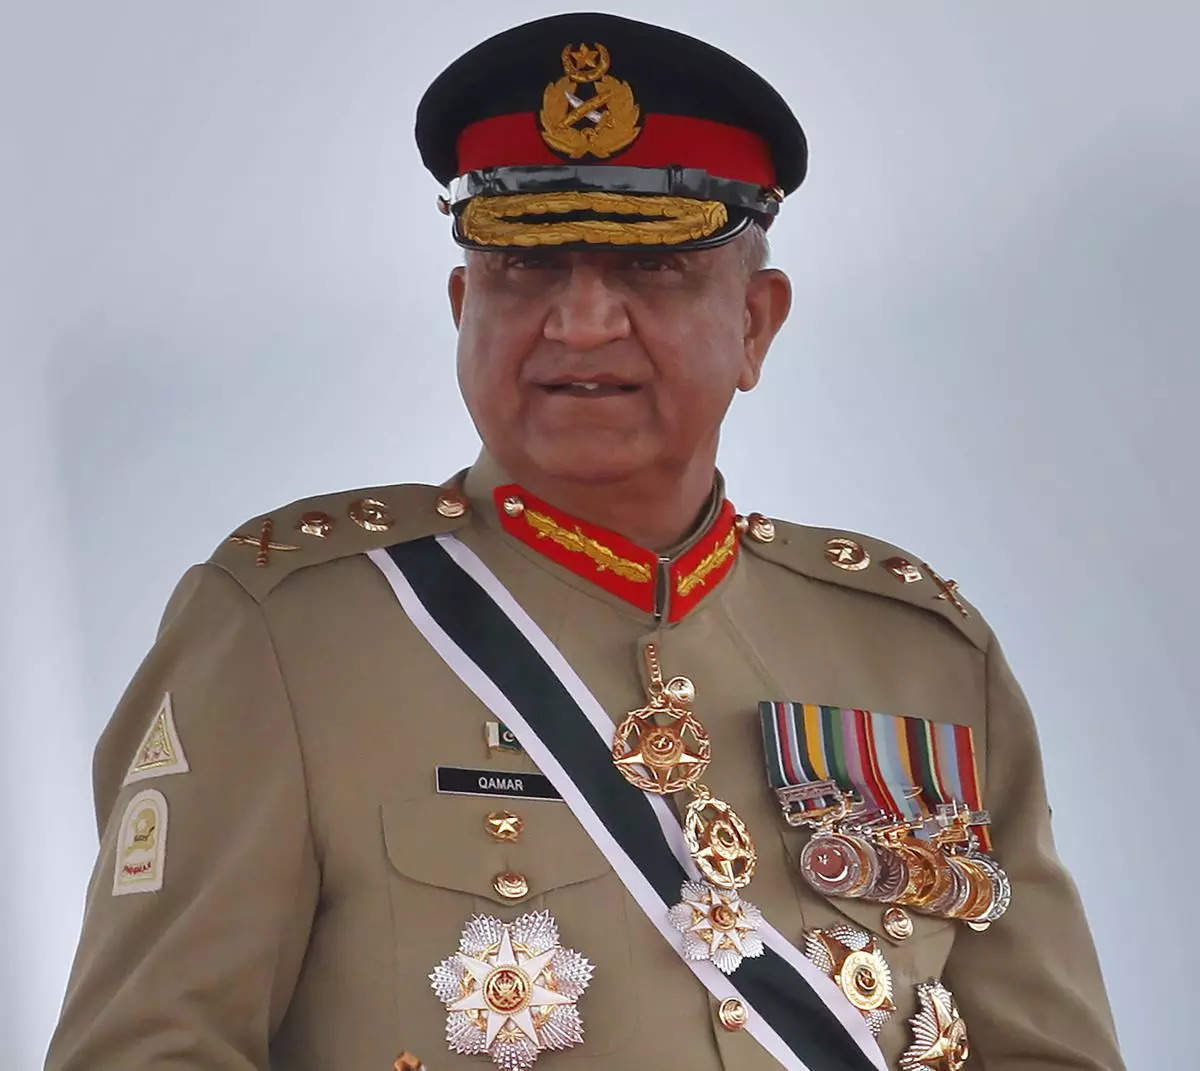 Pakistans Army Chief attends security exhibition in Paris keeps a low profile Report